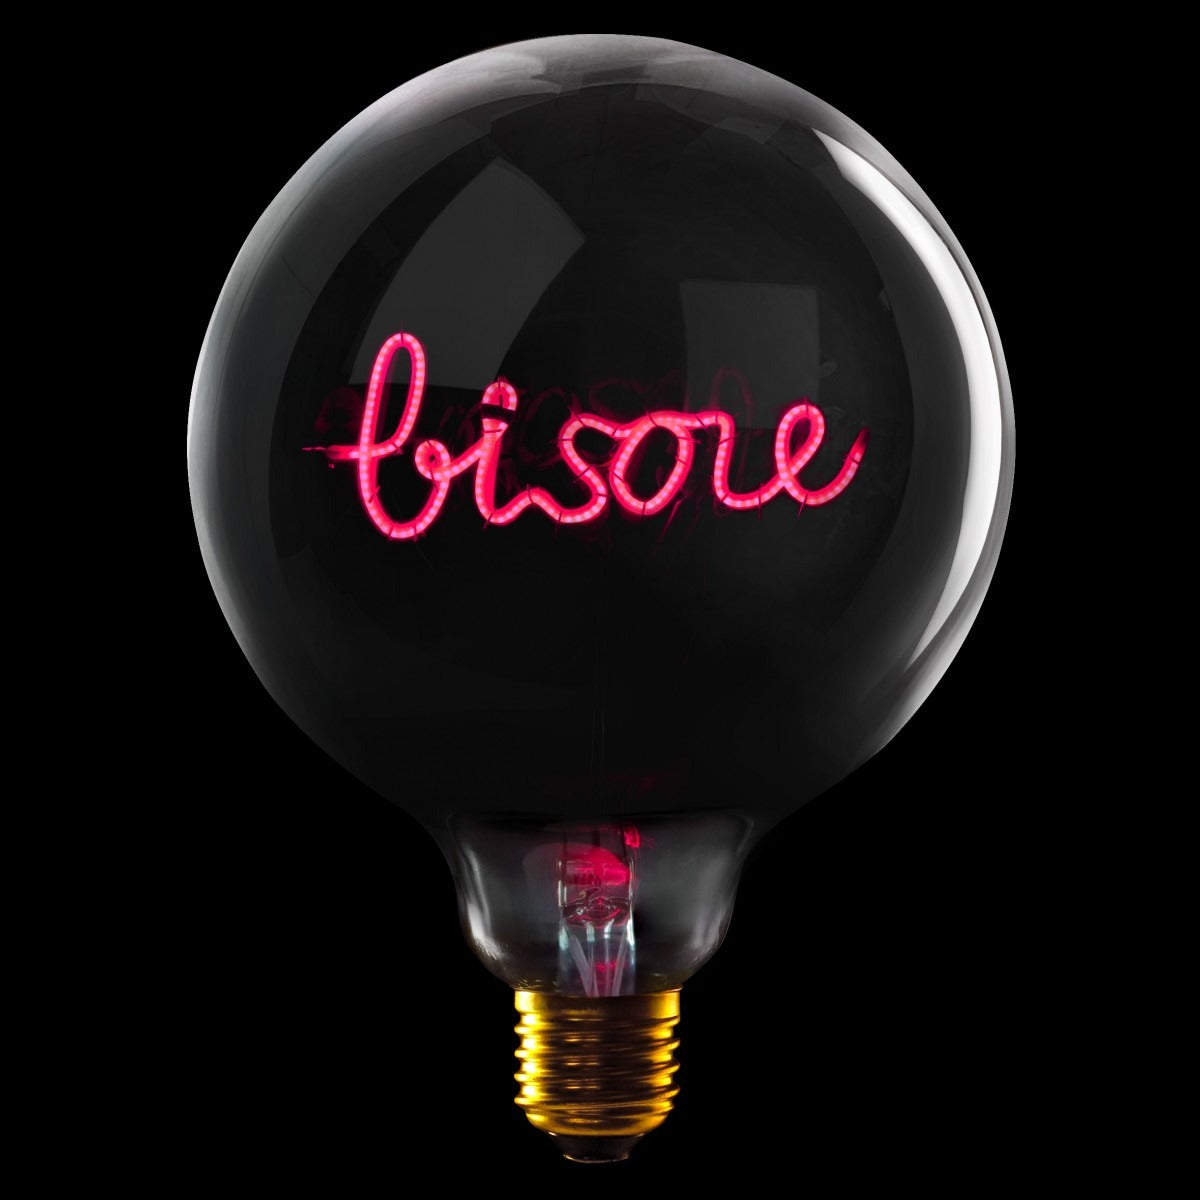 MESSAGE IN THE BULB - BISOU